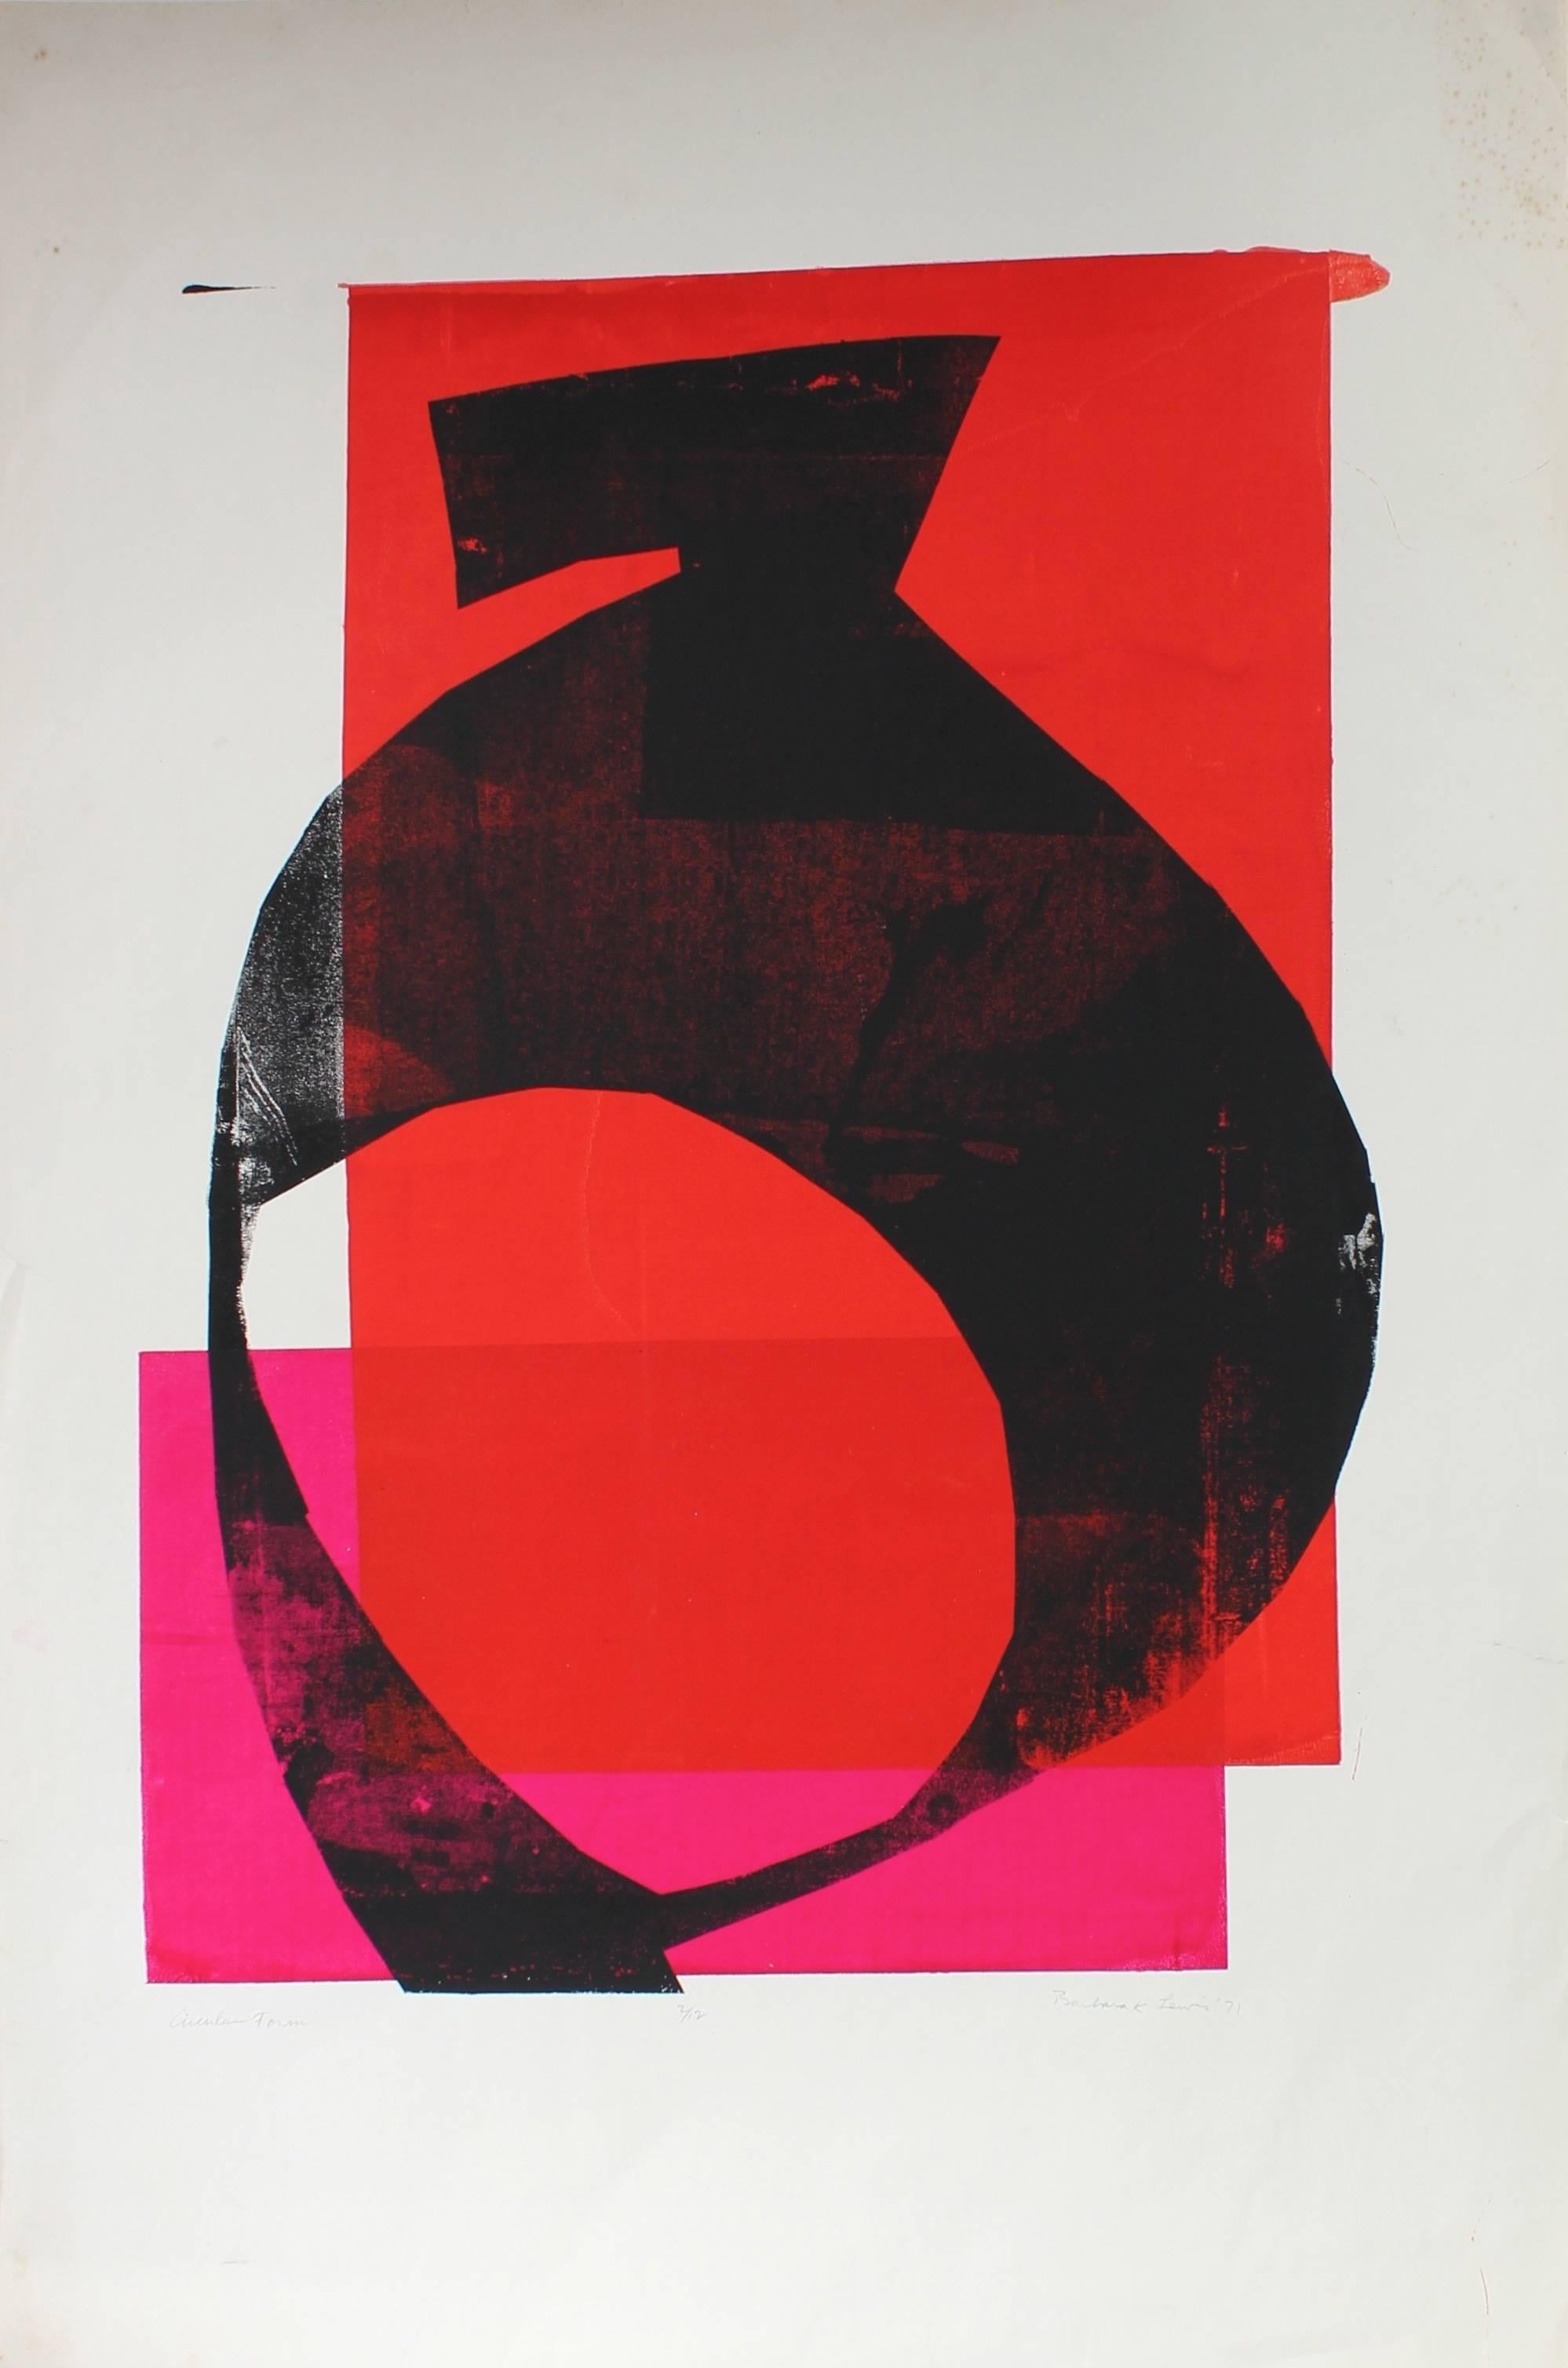 This 1971 serigraph on paper abstract in red, pink, and black entitled 